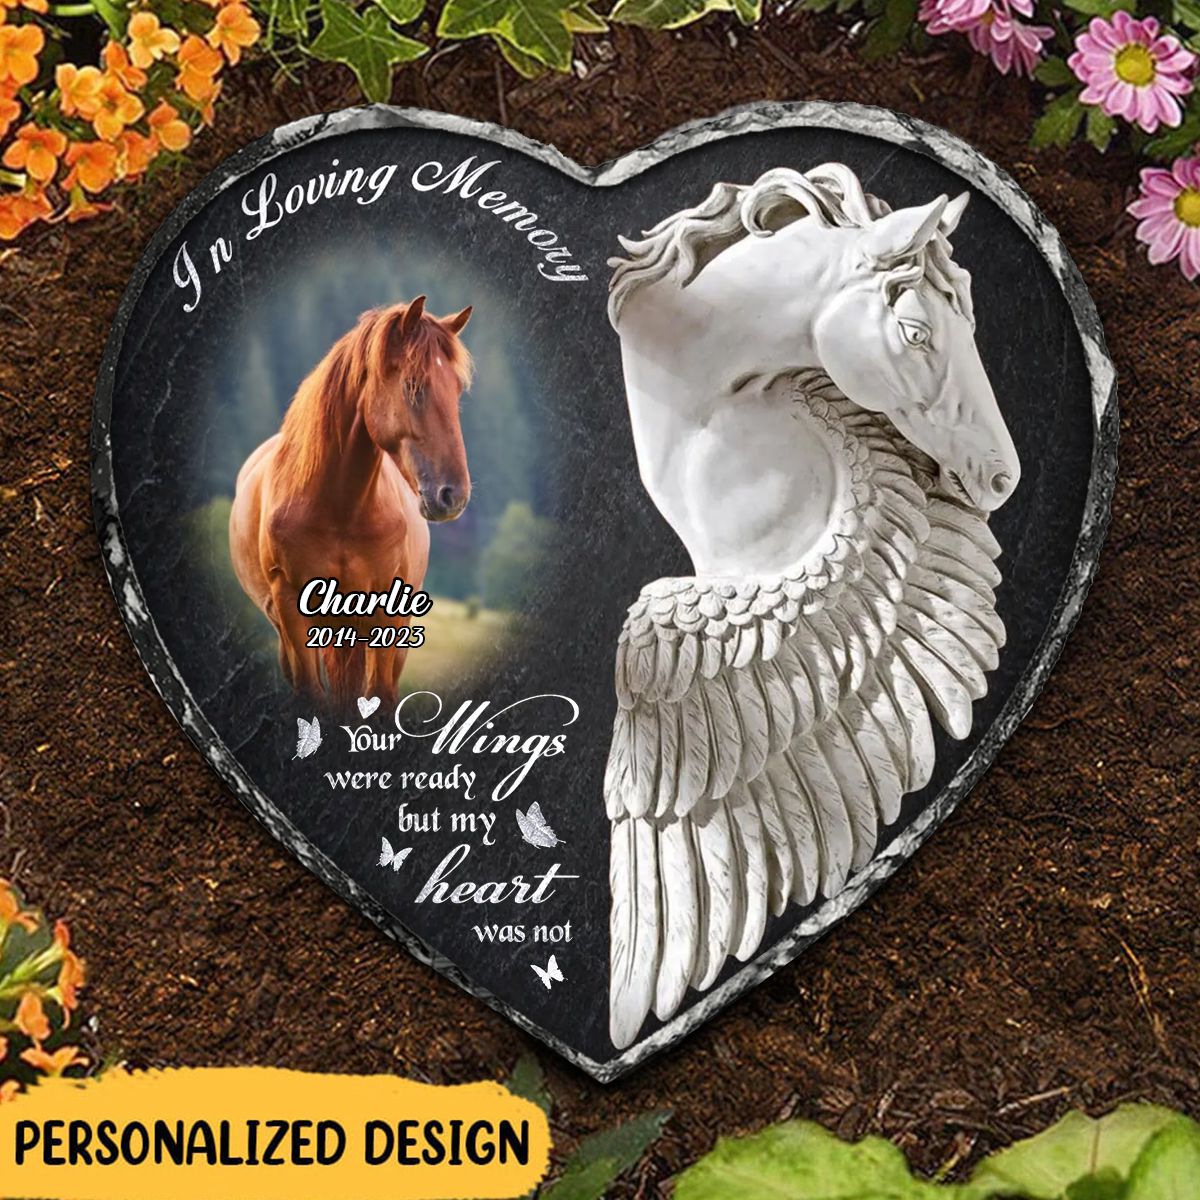 Personalized In Loving Memory Horse Photo Heart Lithograph - Upload Photo - Memorial Gift Idea For Horse Lover - Our Hoofbeats Were Many, But Our Hearts Beat As One